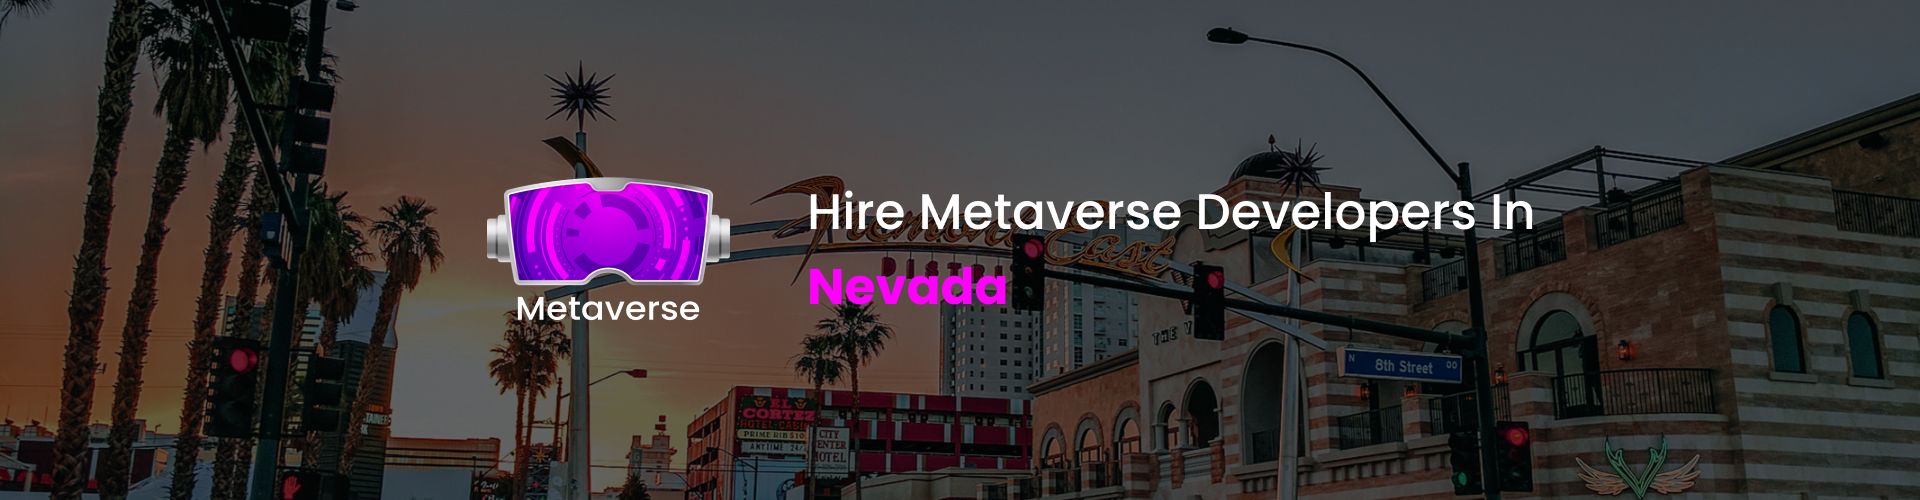 hire metaverse developers in nevada